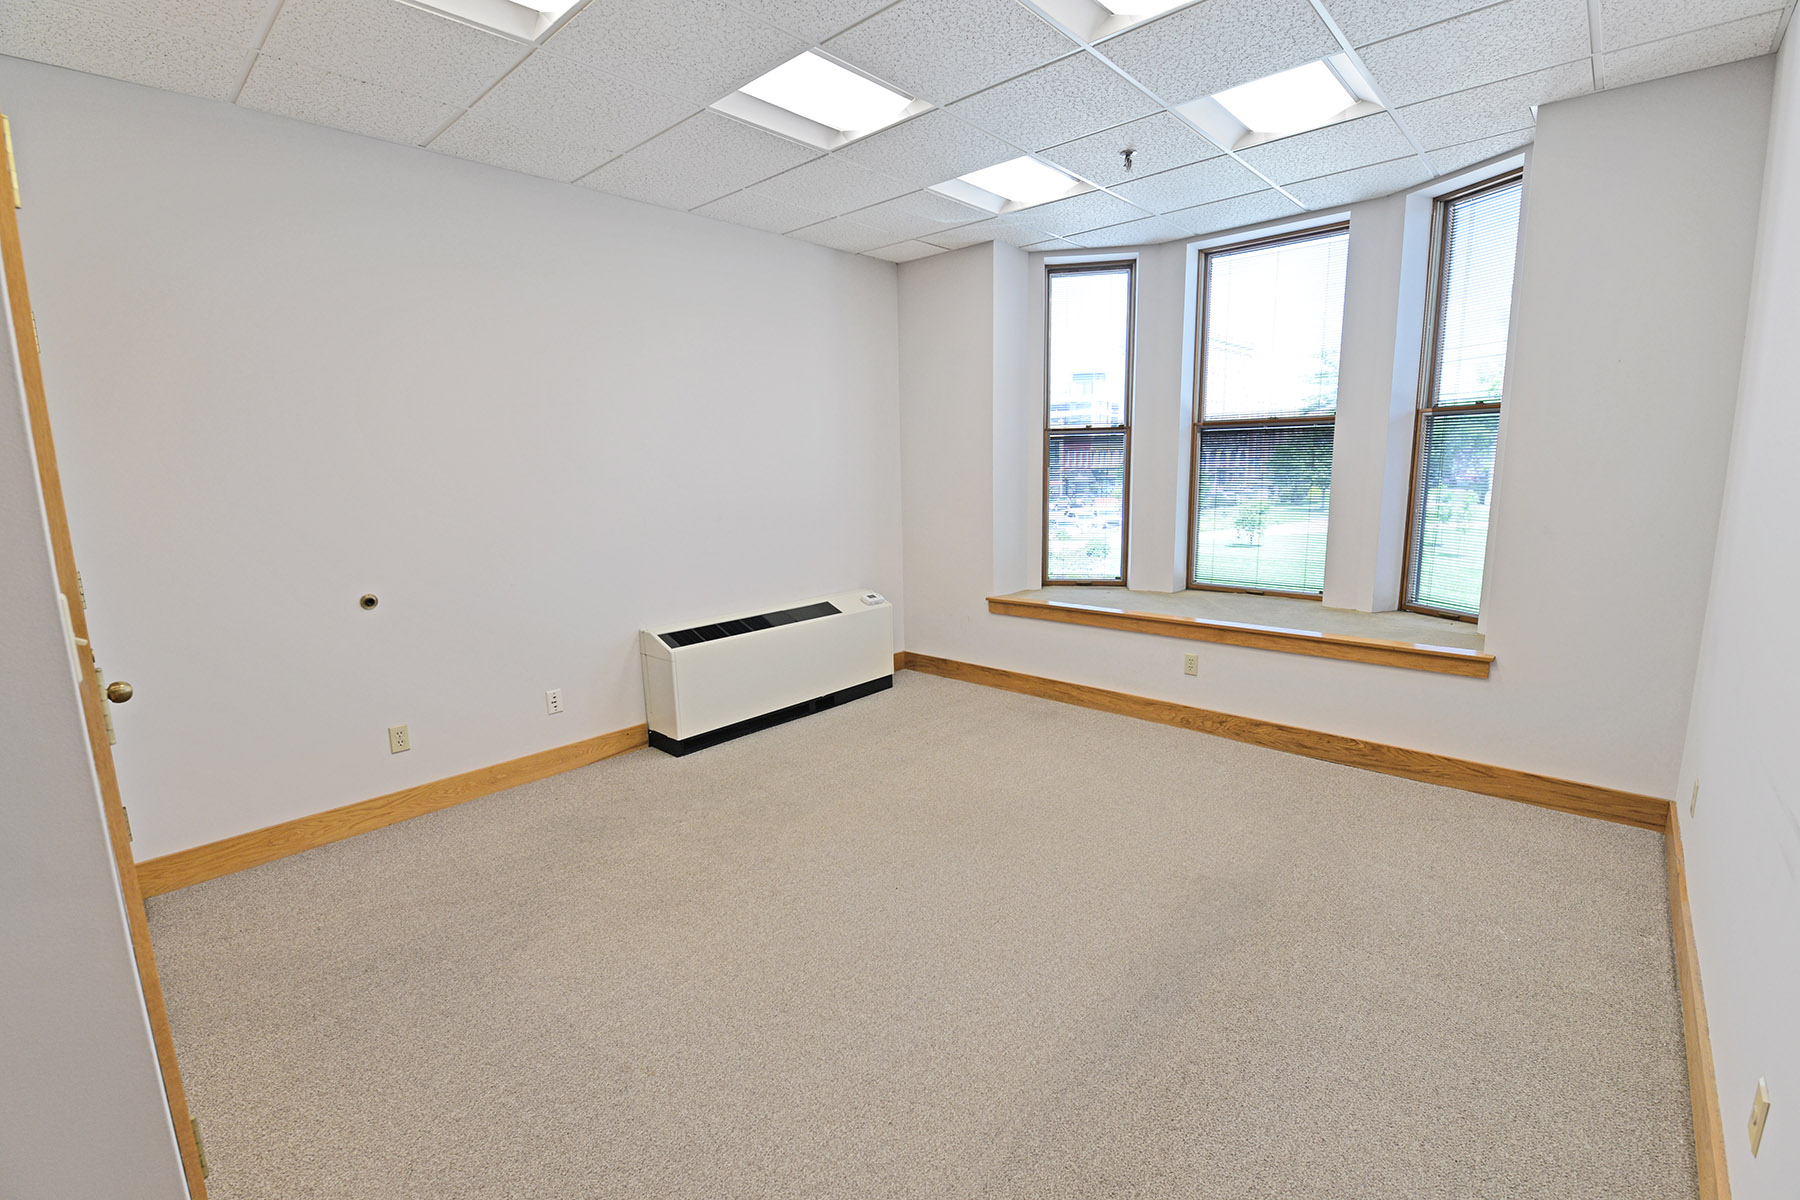 Fountain Square, Suite 213, private office number 1, overlooks the downtown